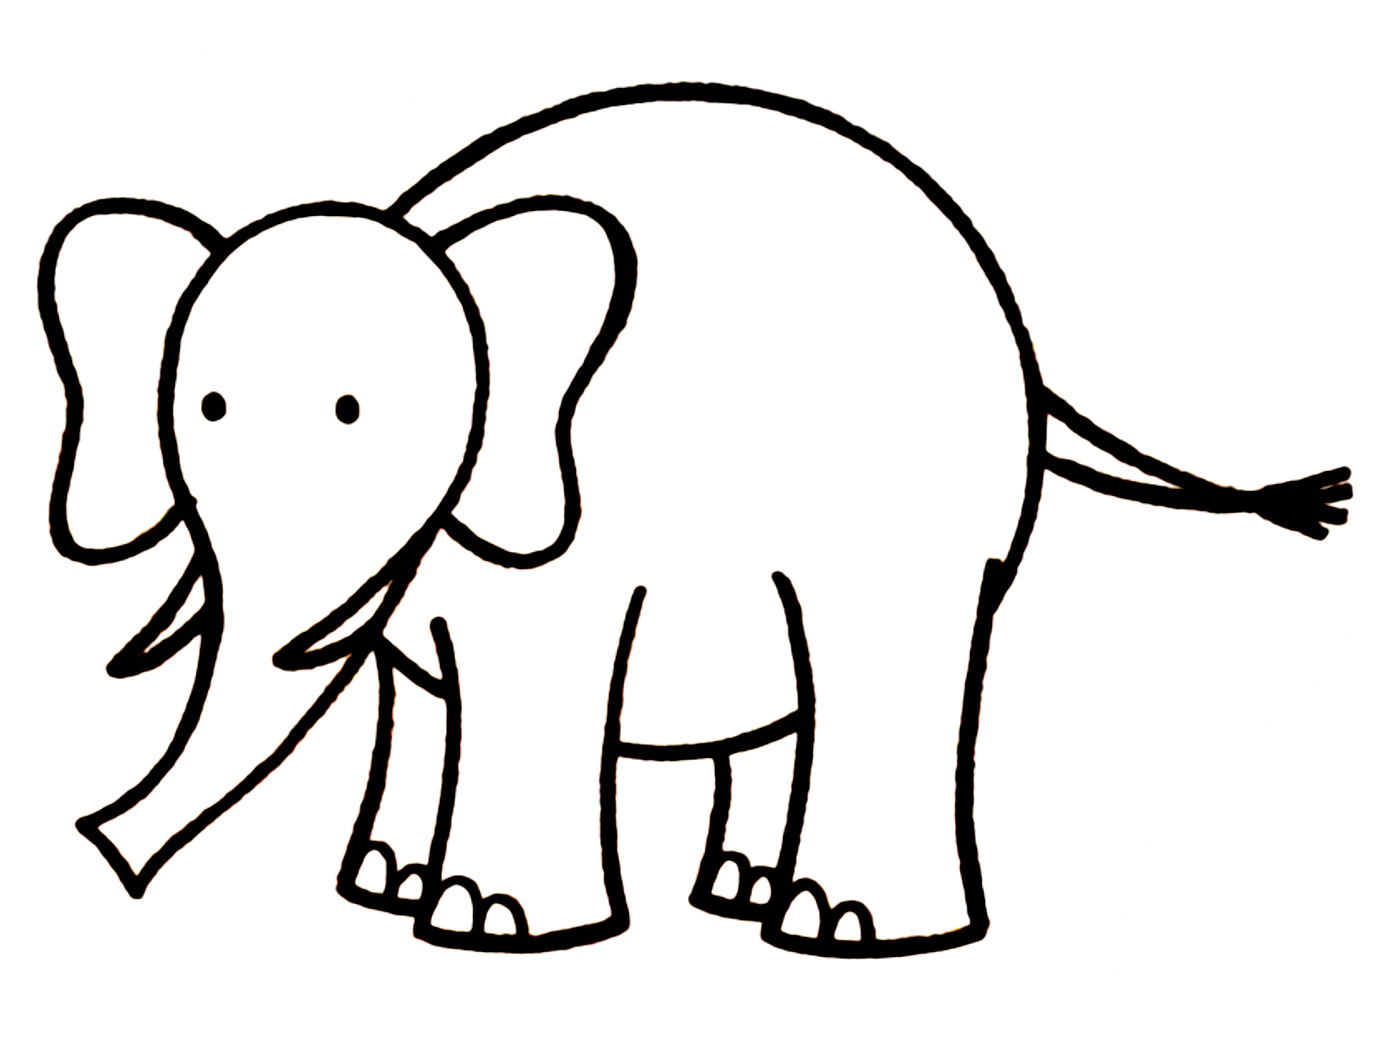 Free Elephant Drawings Images, Download Free Clip Art, Free